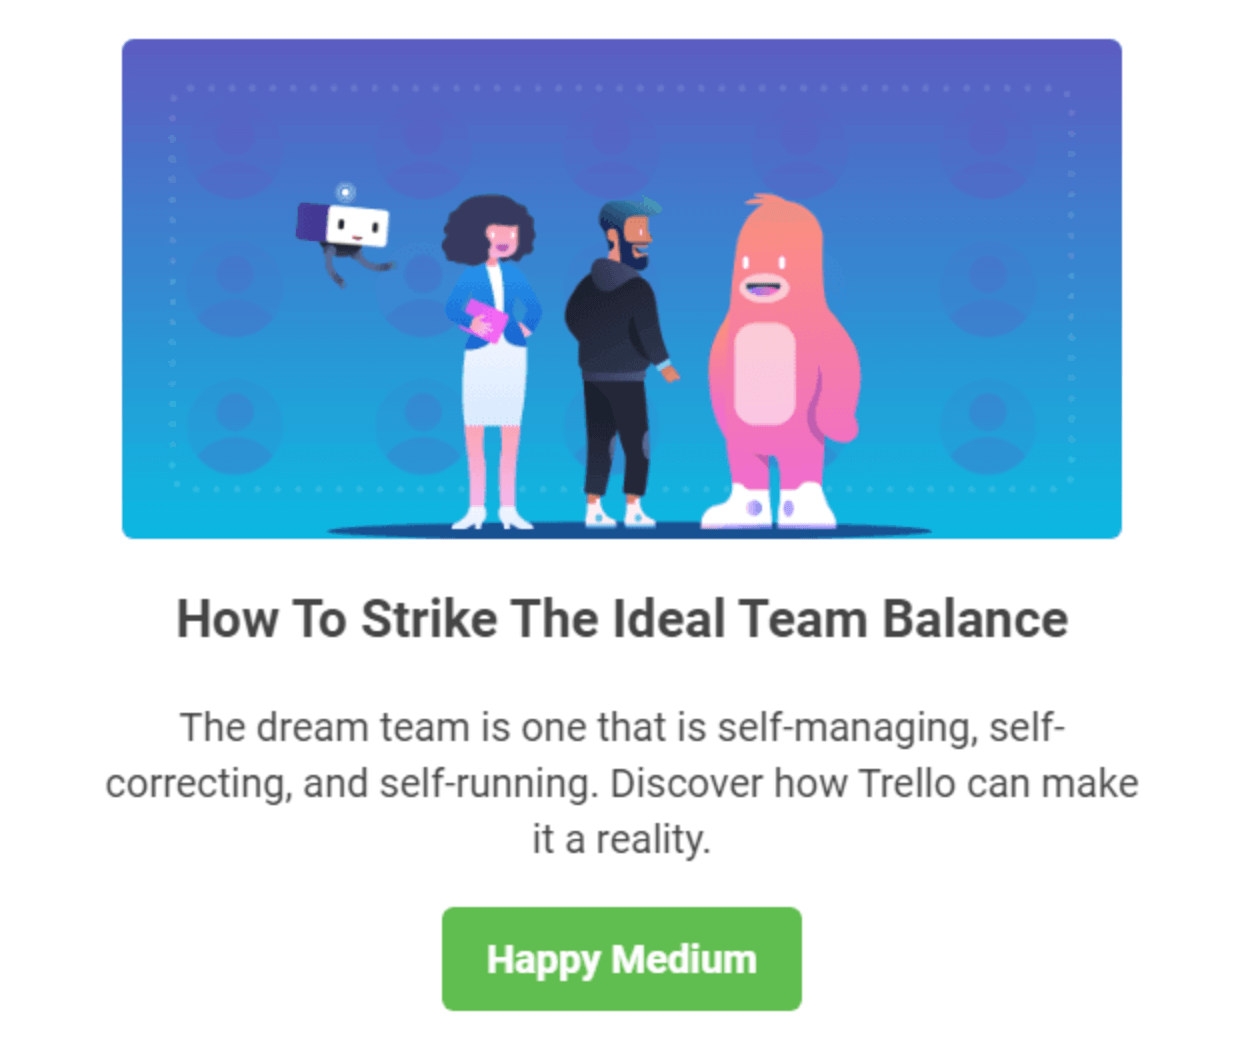 trello email b2b email marketing strategy